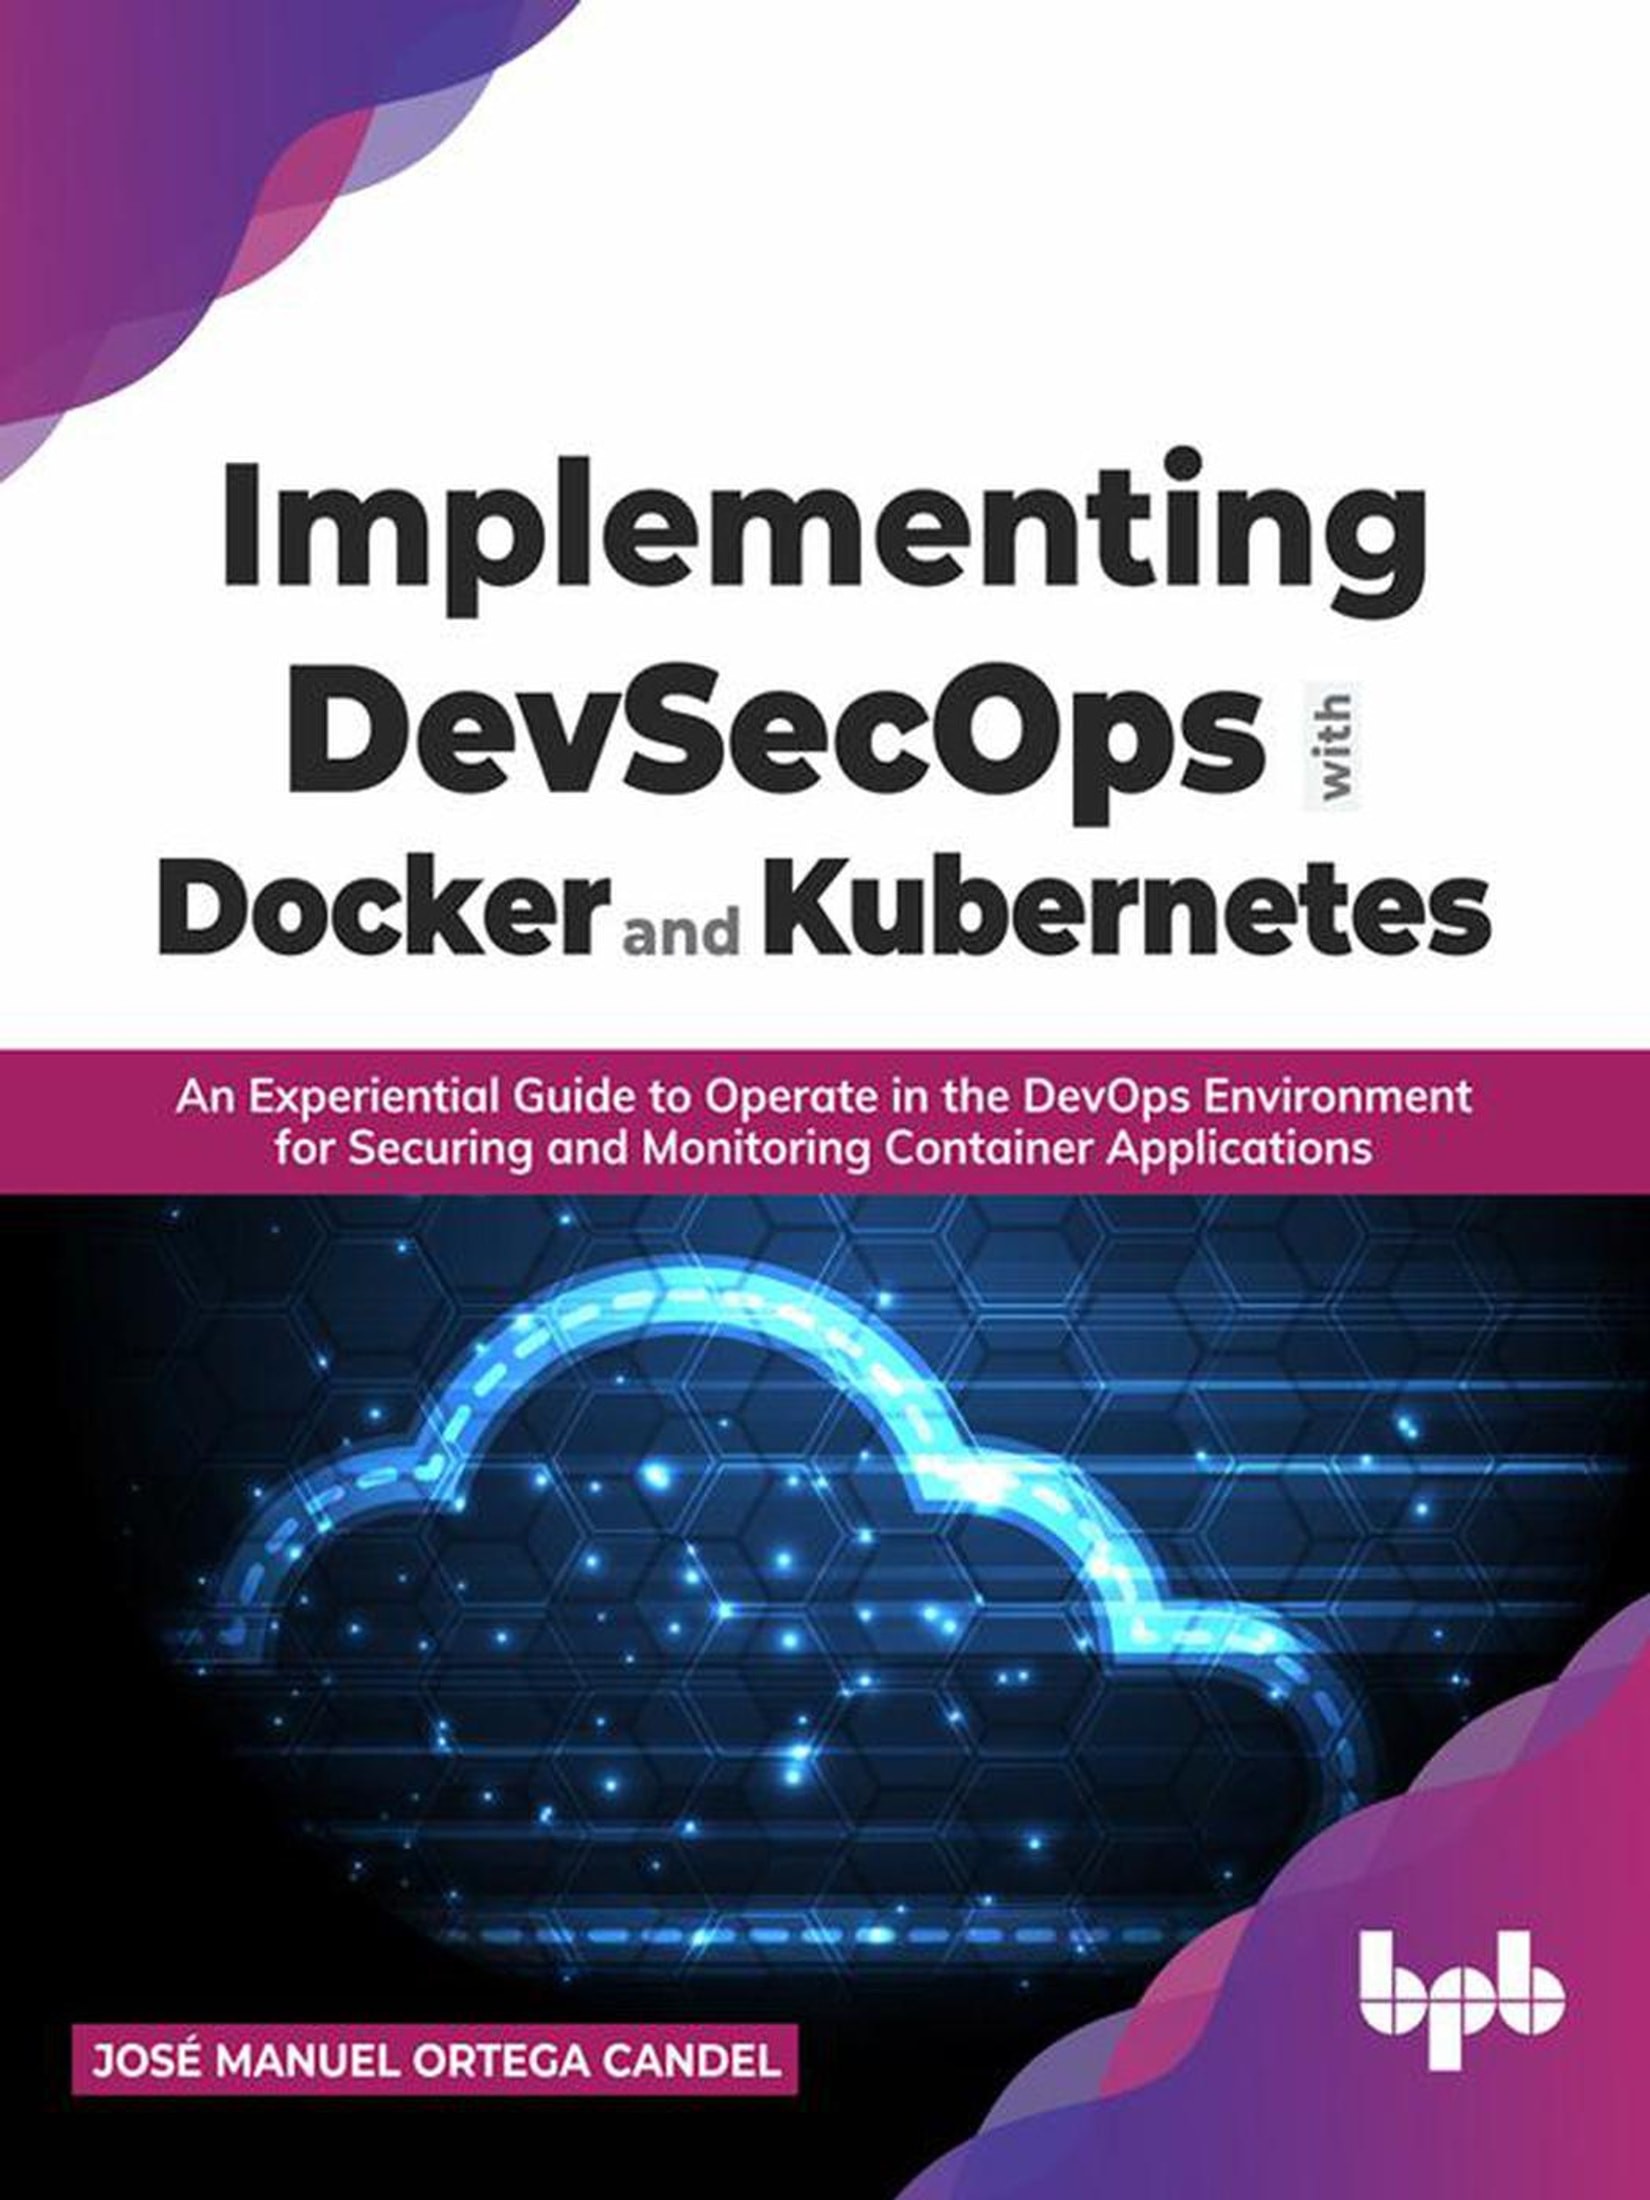 Implementing DevSecOps With Docker and Kubernetes: An Experiential Guide to Operate in the DevOps Environment for Securing and Monitoring Container Applications (English Edition)